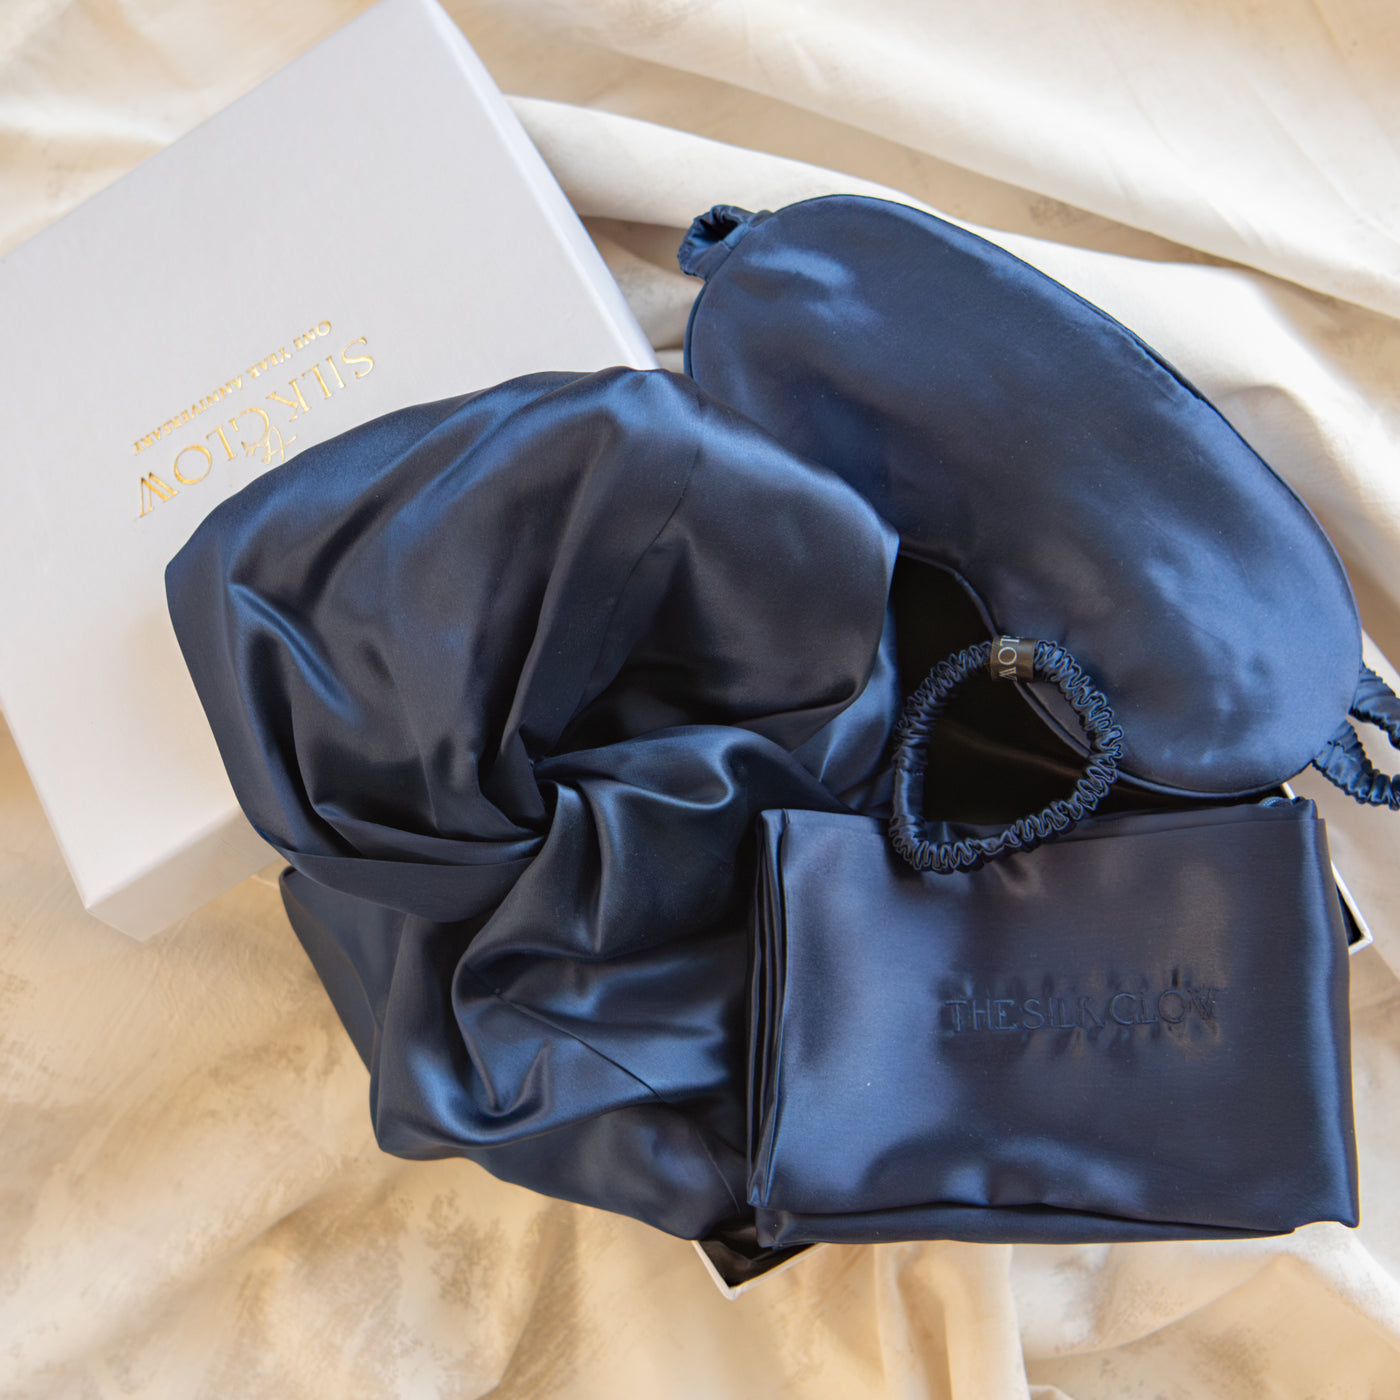 The Silk Collection Gift Box